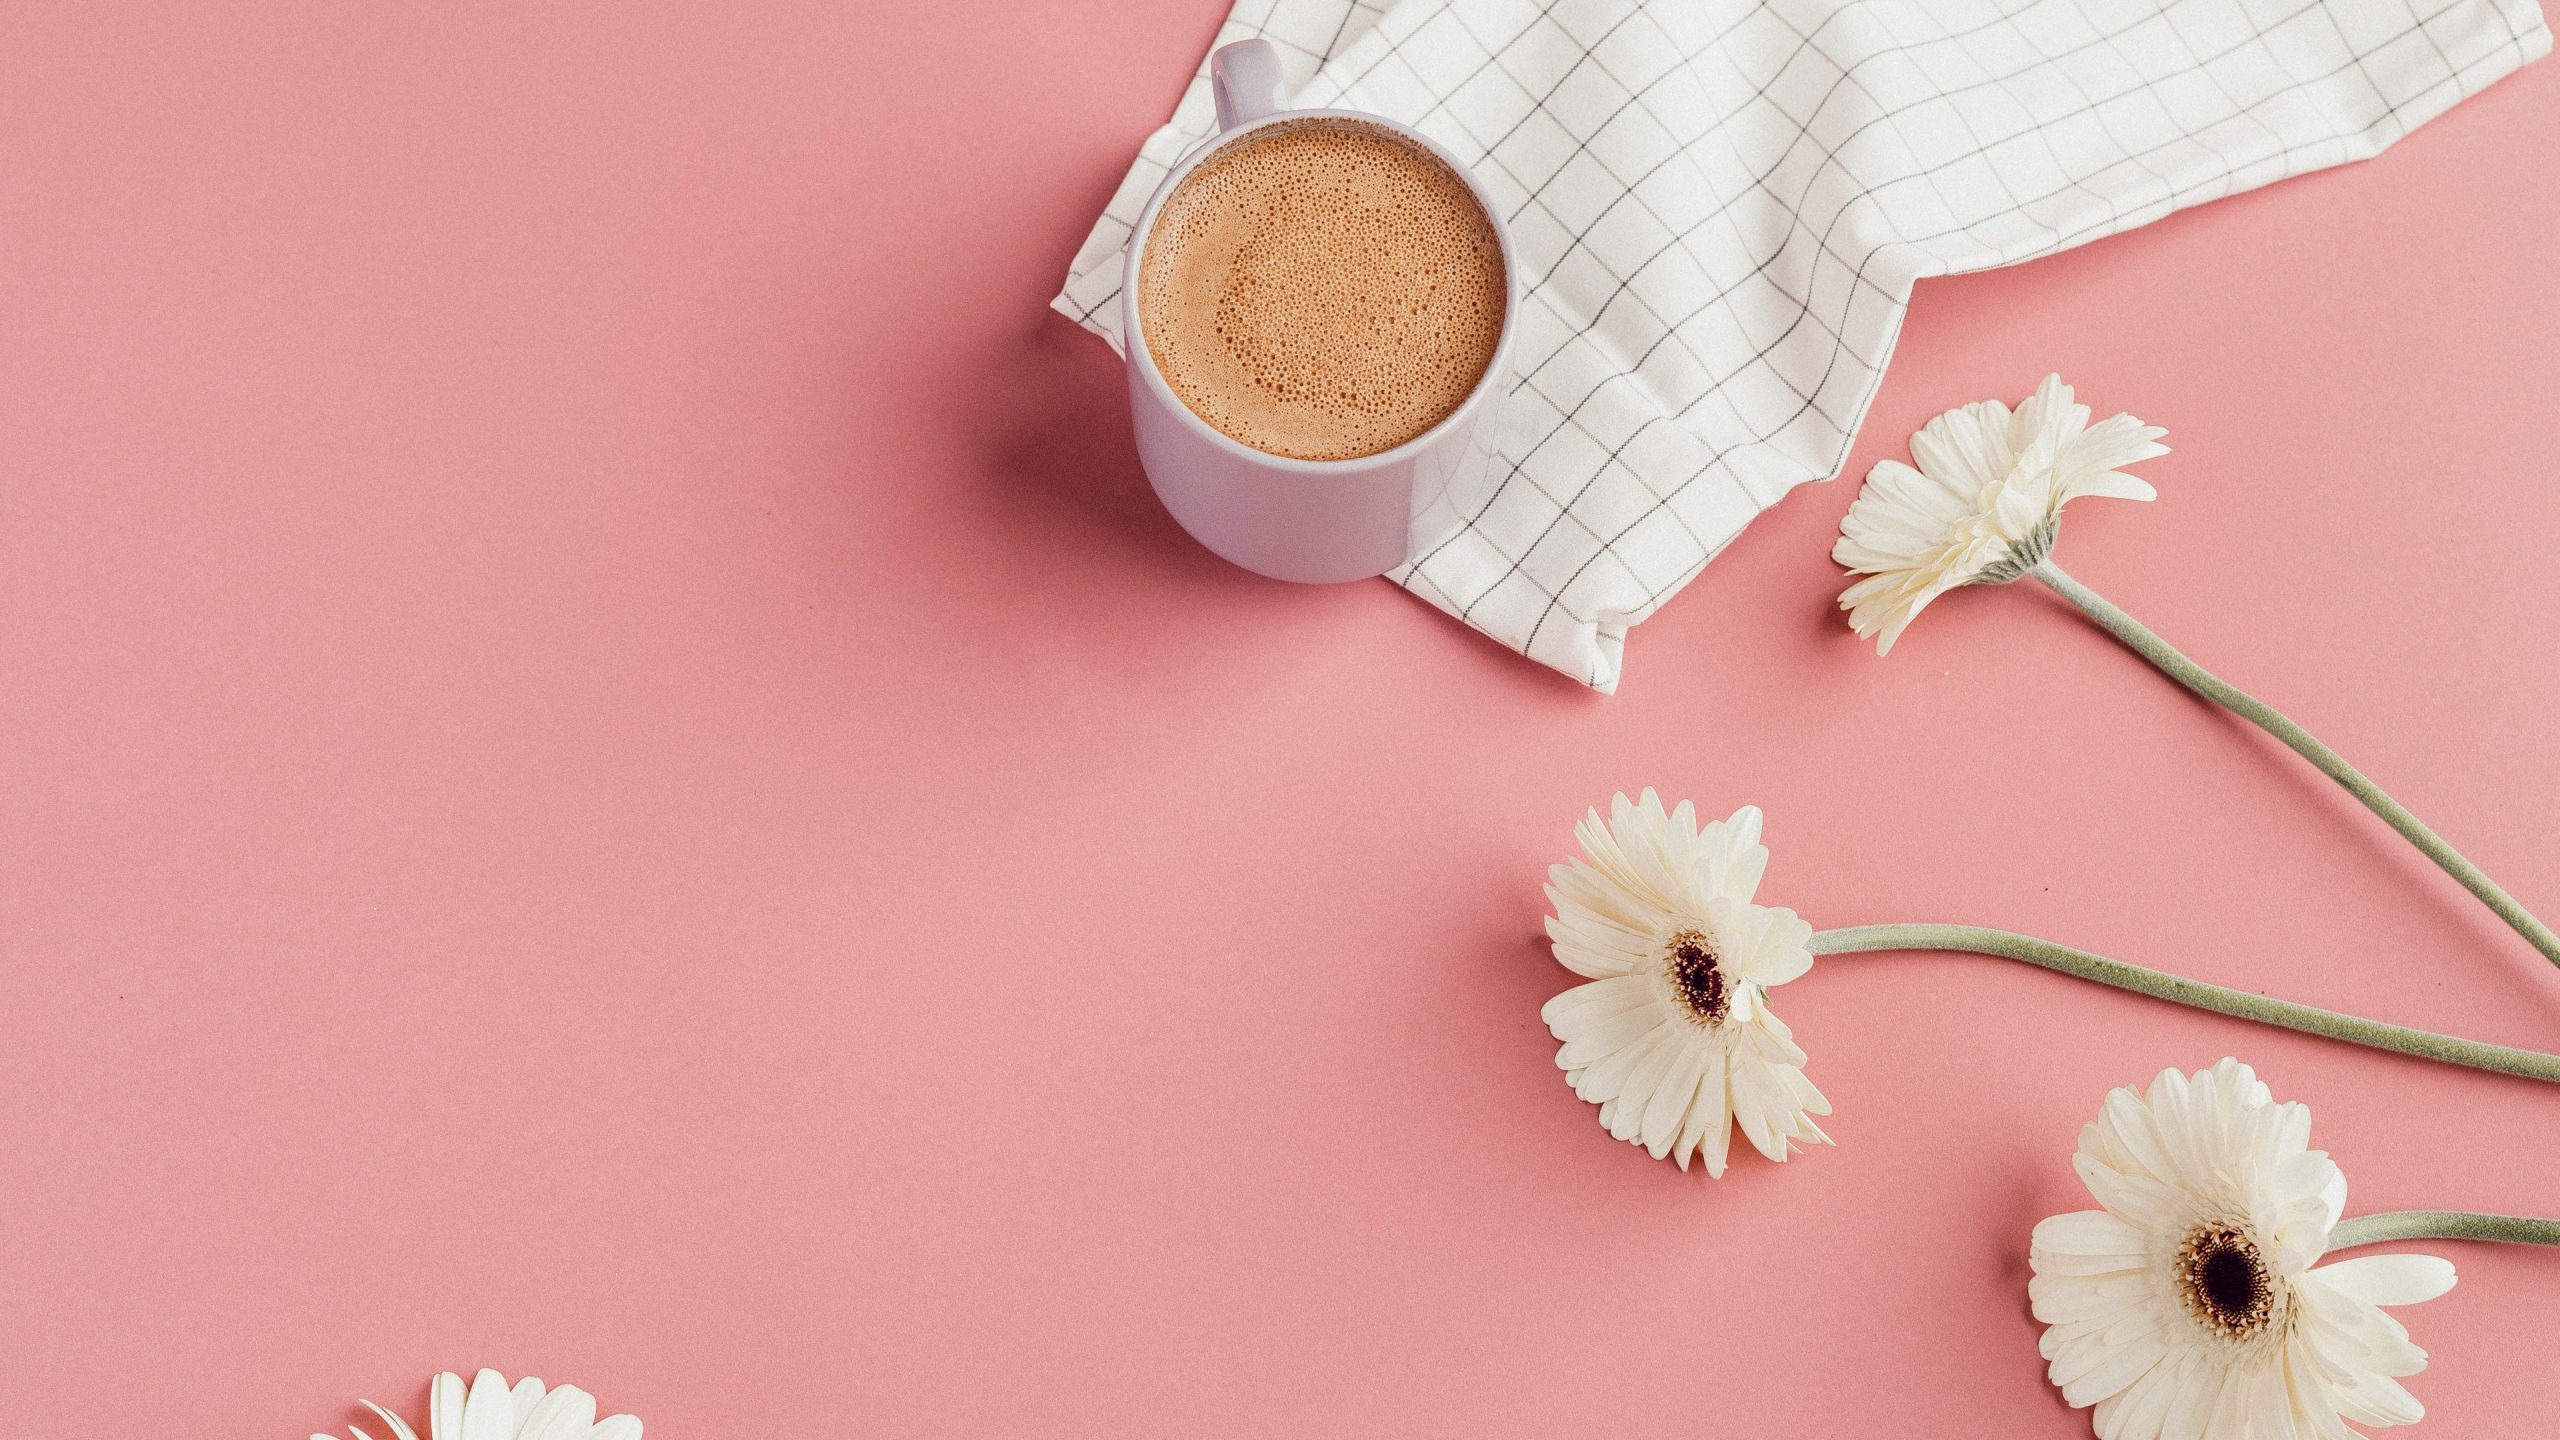 A cup of coffee and some flowers on top - Desktop